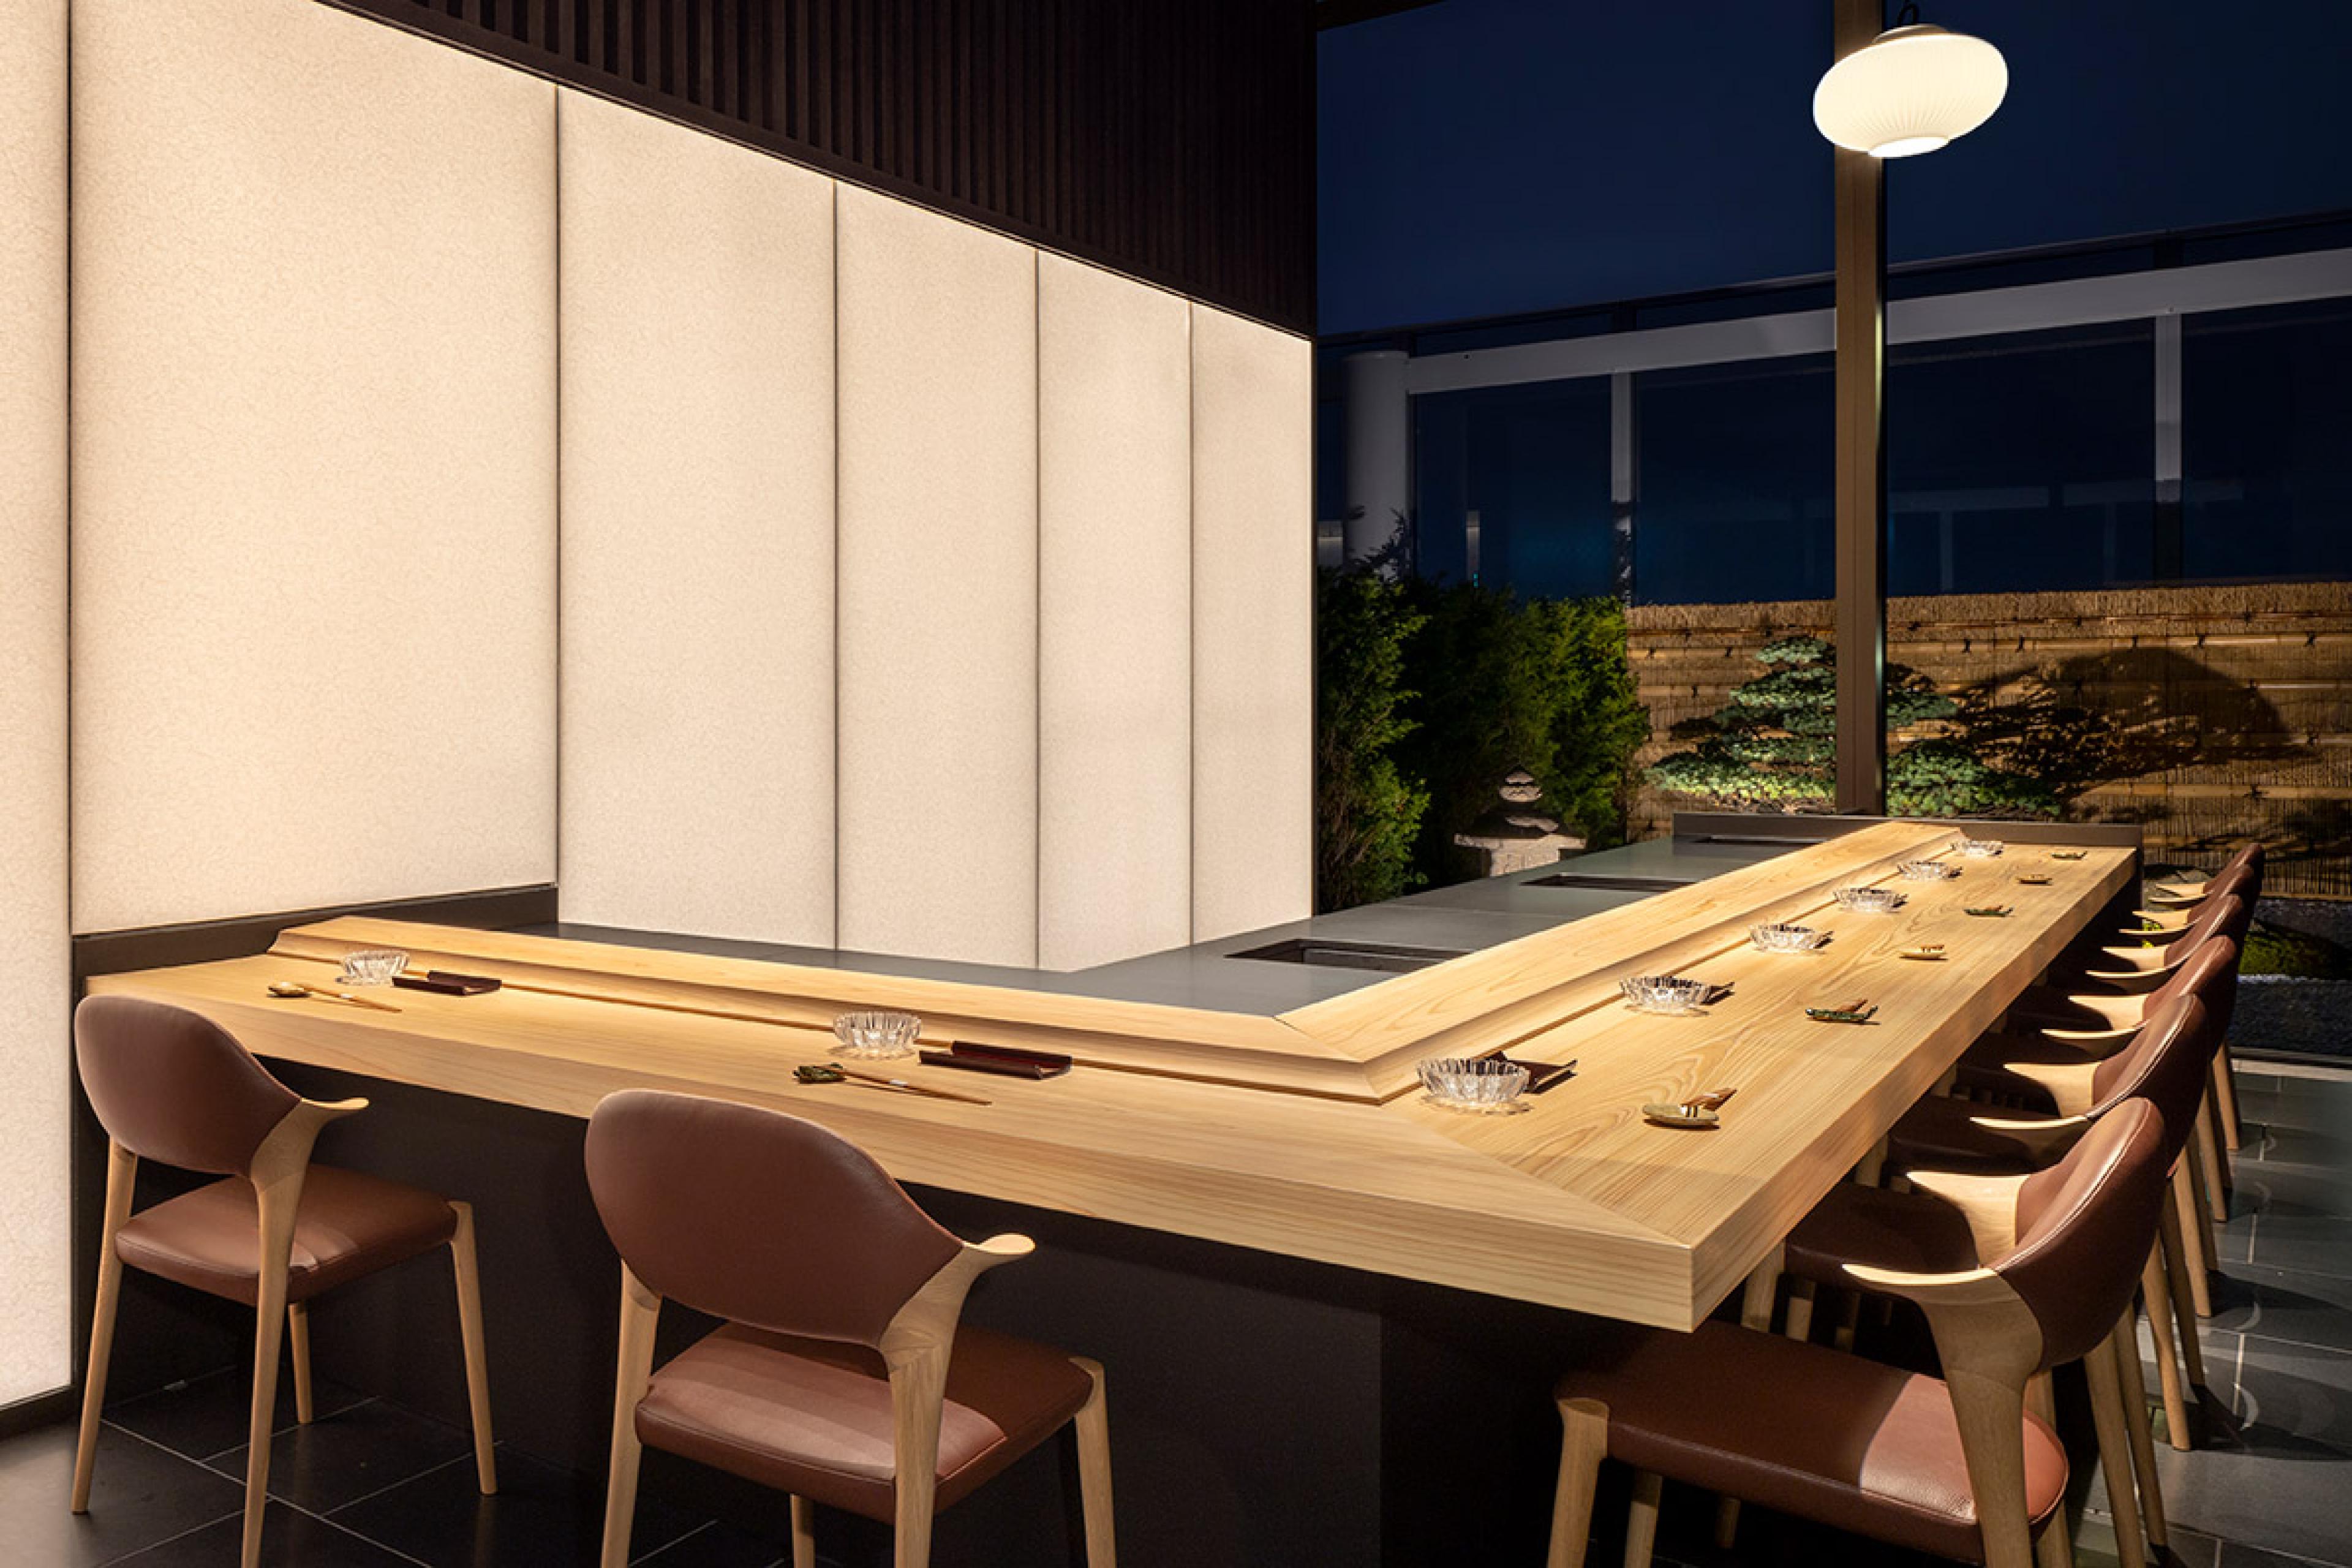 omakase restaurant with pale wooden counter and under 10 seats for dining